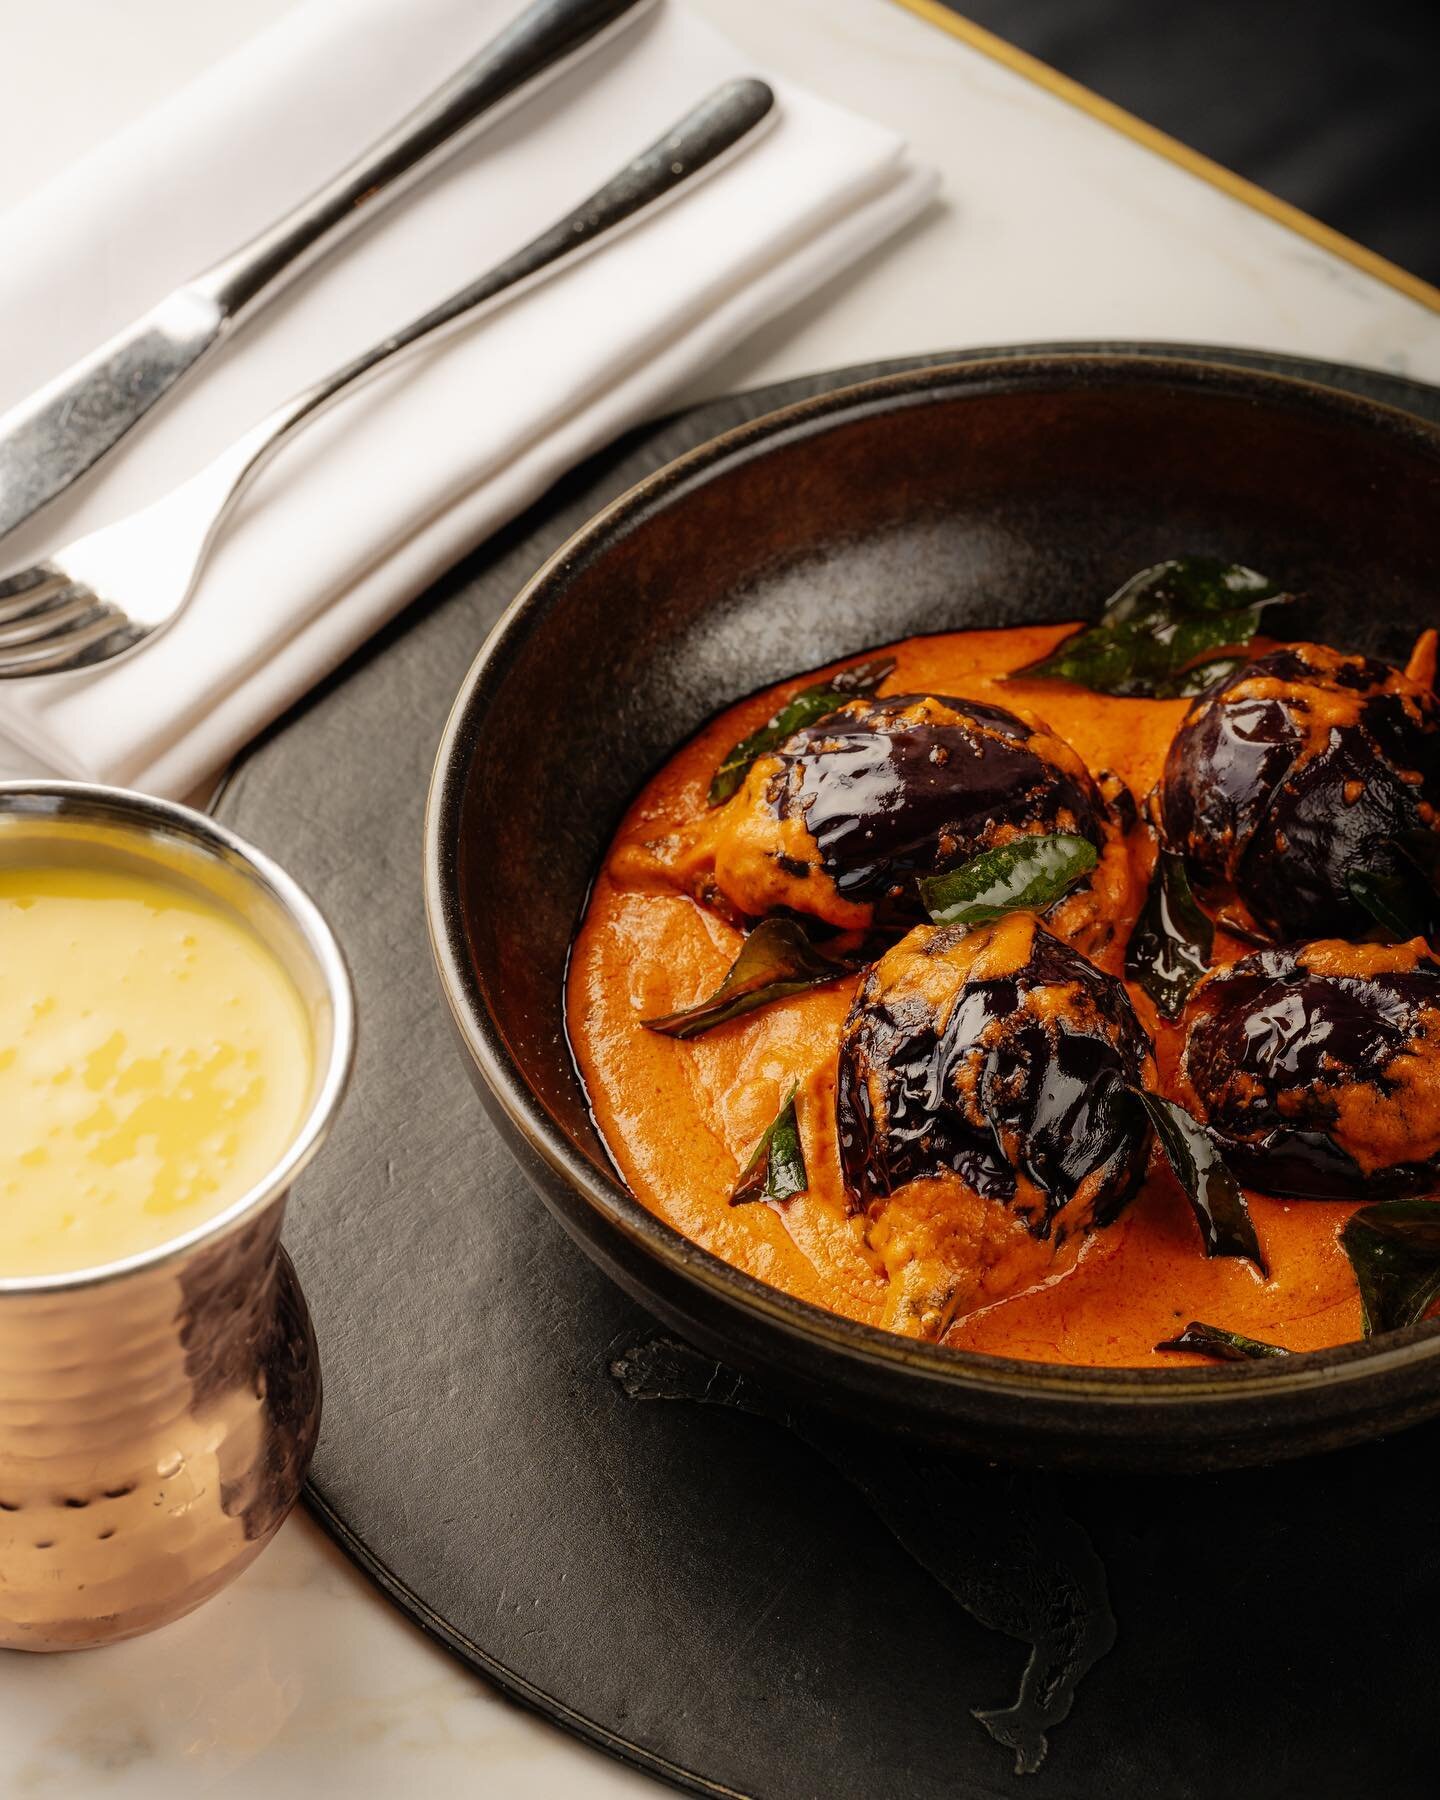 Why not try our Baby eggplant simmered in peanut,dry coconut,white sesame seeds and poppy seeds gravy. @harrodsfood @chefvineet